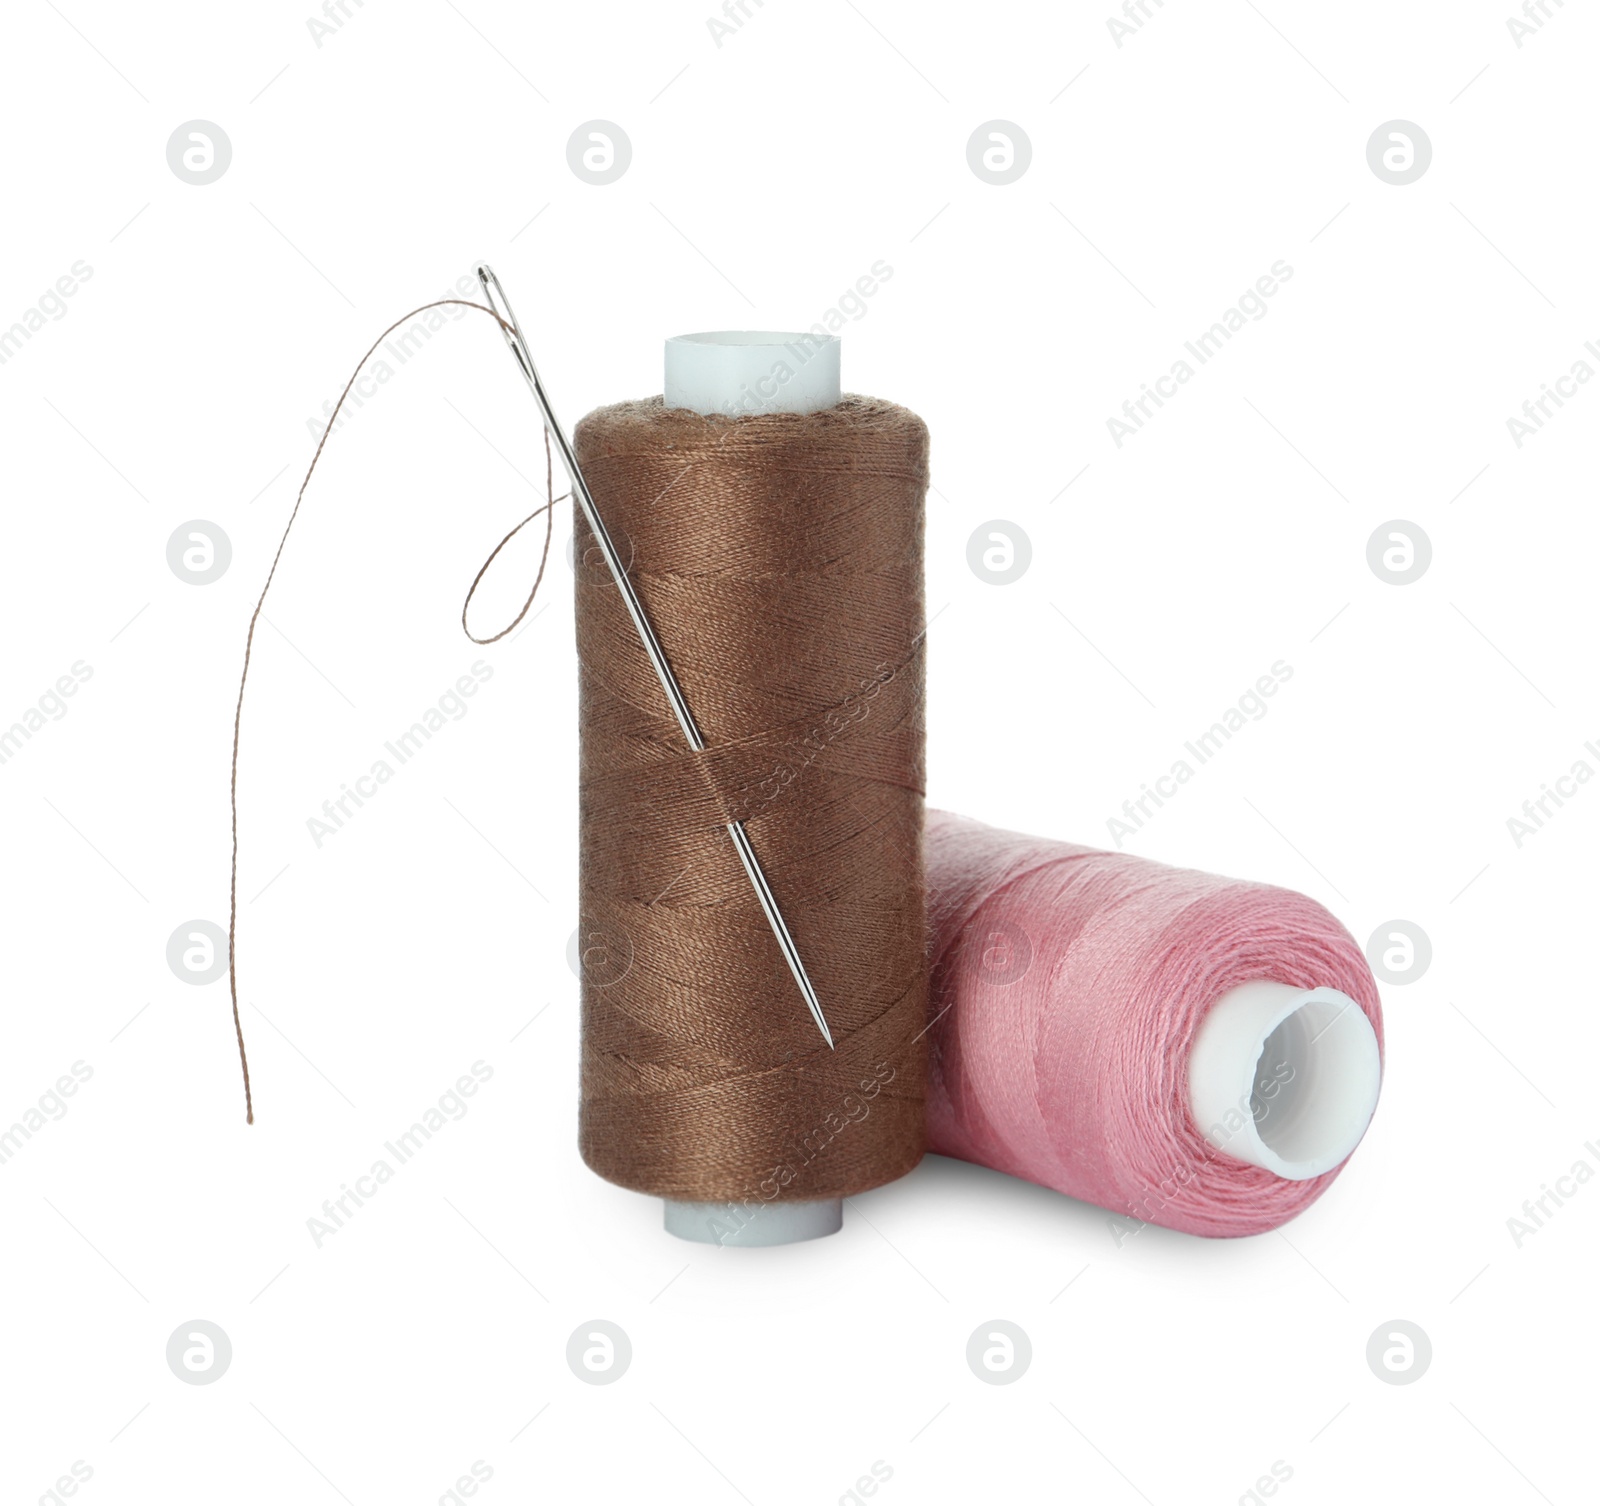 Photo of Different colorful sewing threads and needle on white background